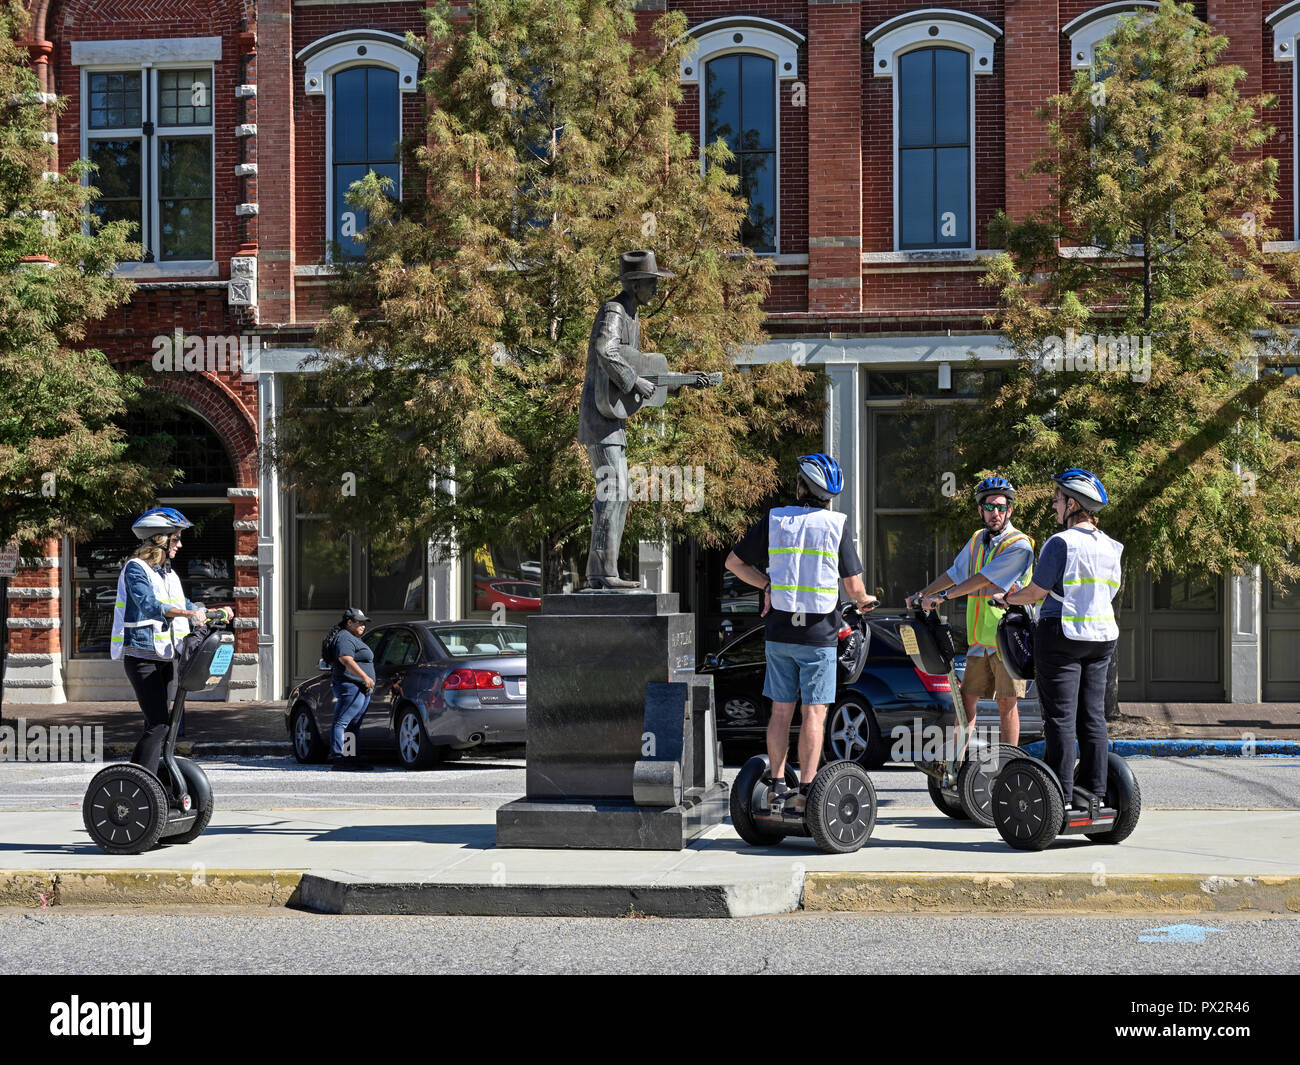 Tourists on a Segway in a tour group stop to view the Hank Williams memorial bronze statue in Montgomery Alabama, USA. Stock Photo